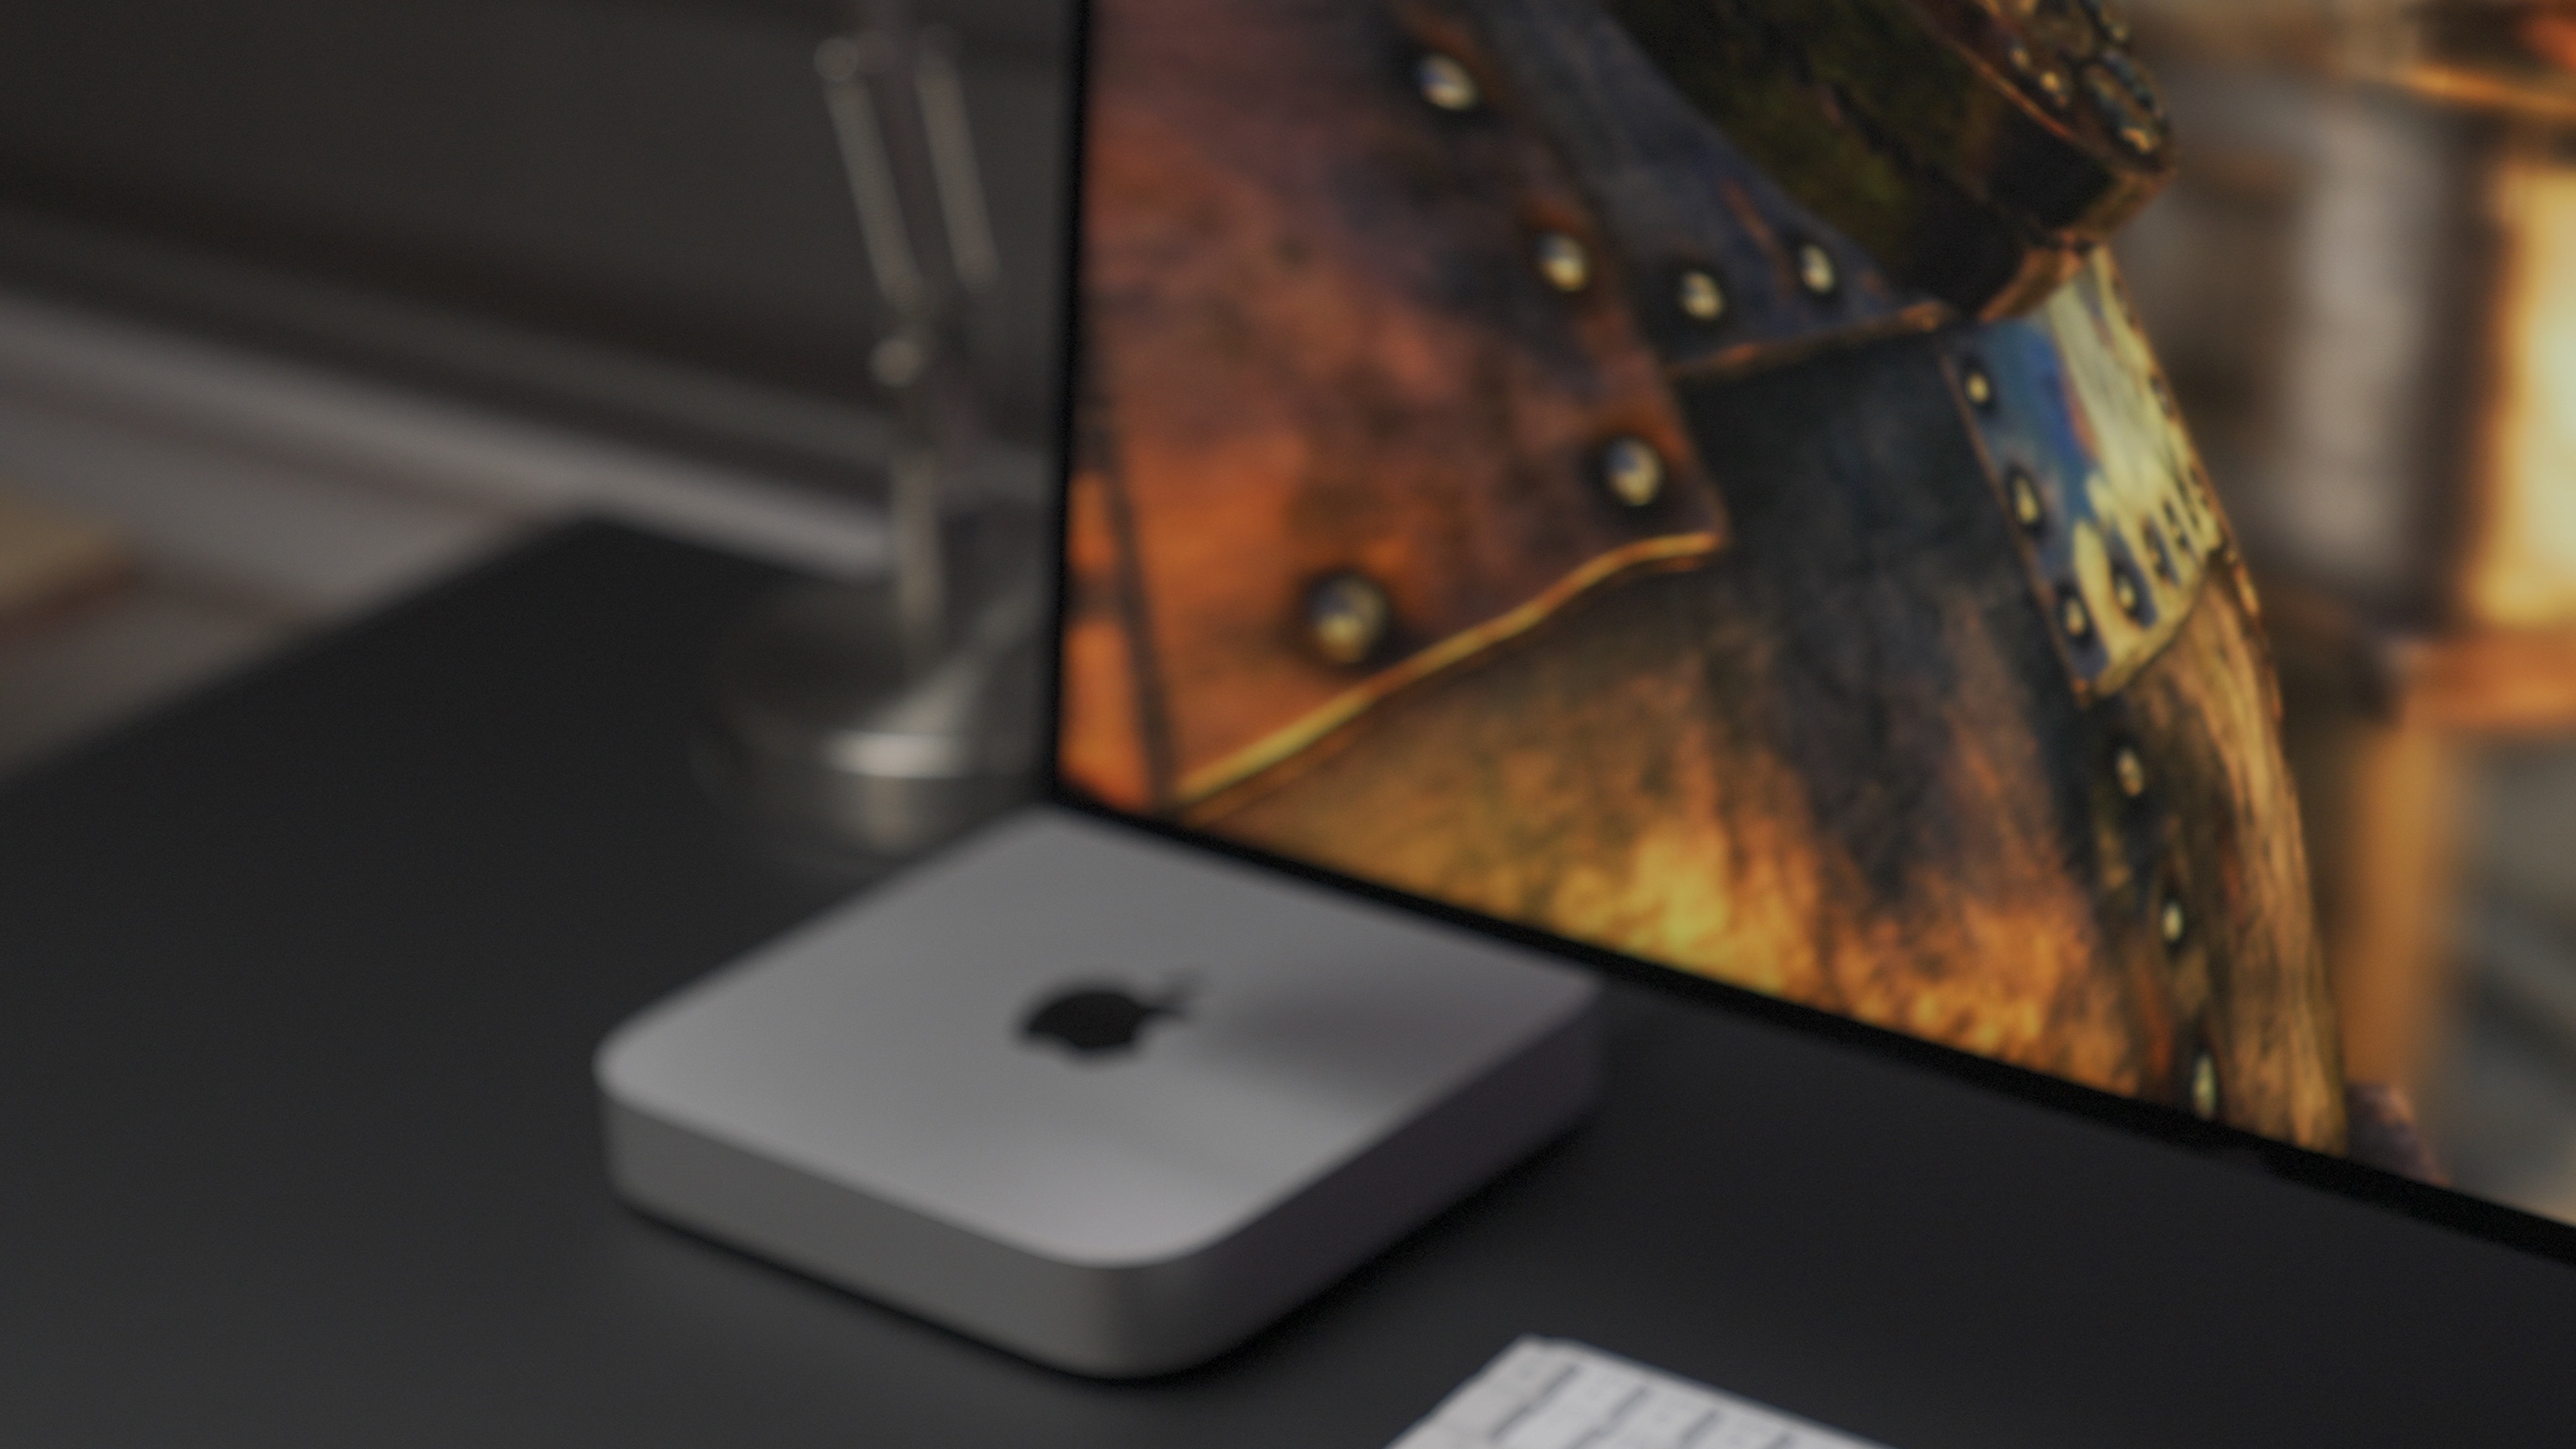 Apple M2 Mac Mini 2023 Review: M2 and M2 Pro Chips Boost This Tiny